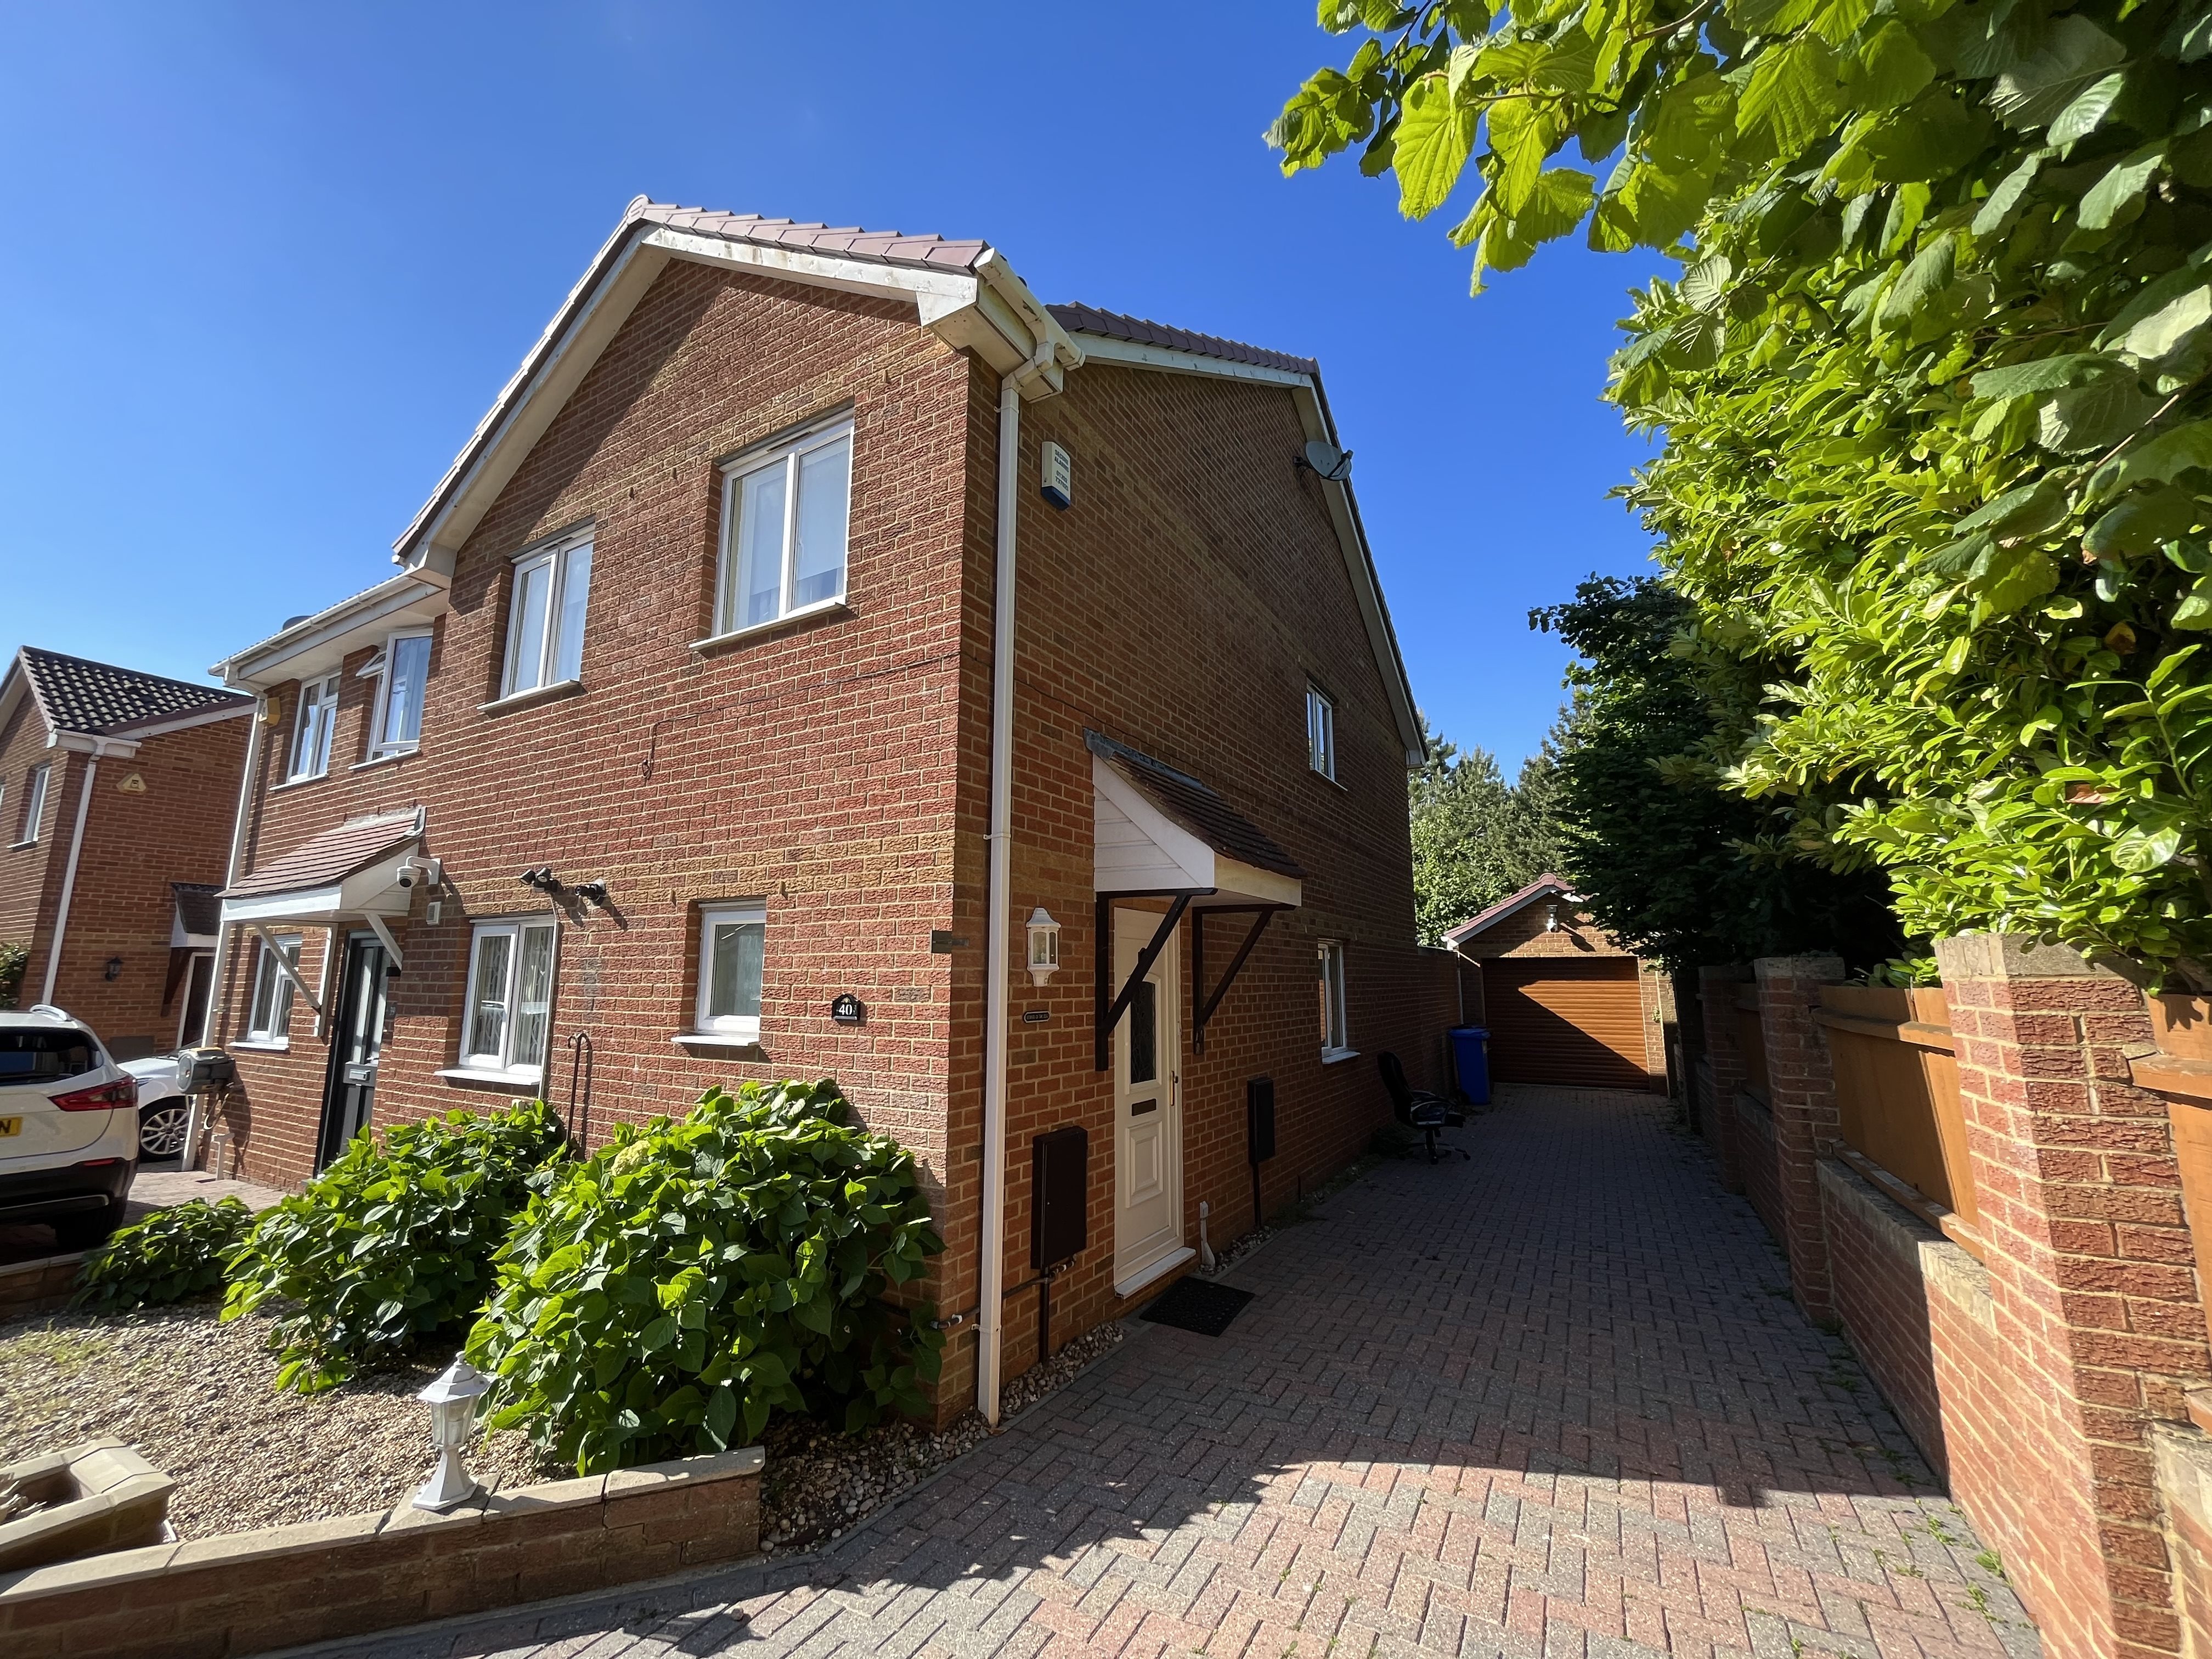 Christopher Shaw Residential are delighted to offer this well presented three bedroom family home in the desirable Talbot Village.Set in a quiet cul-de-sac the property has plenty of parking including a garage, private garden, and conservatory.